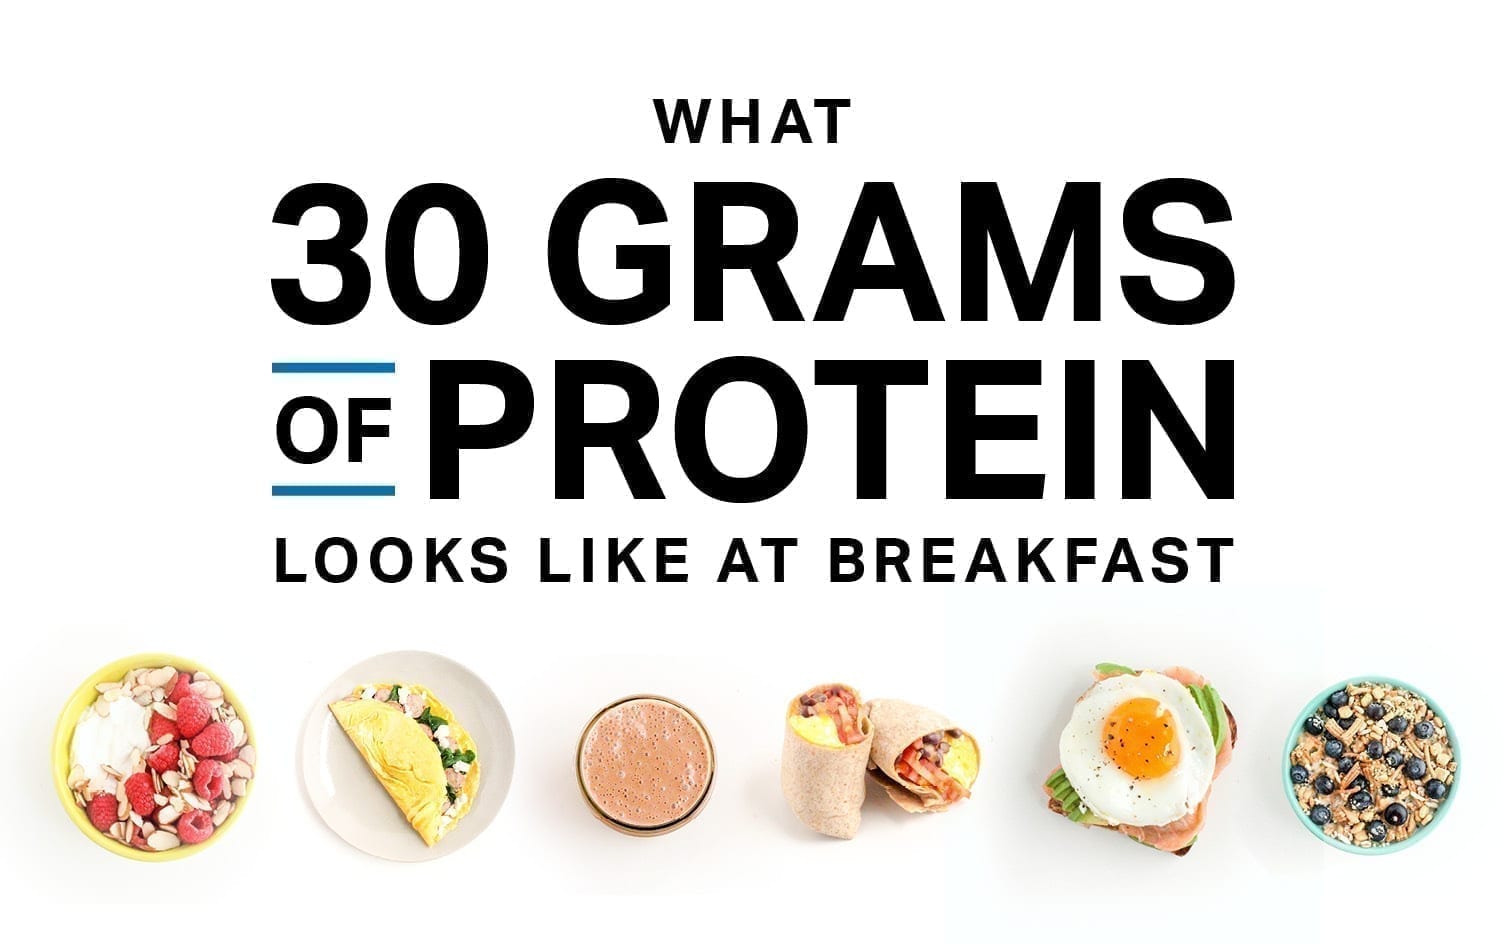 This Is What a Breakfast with 30 Grams of Protein Looks Like